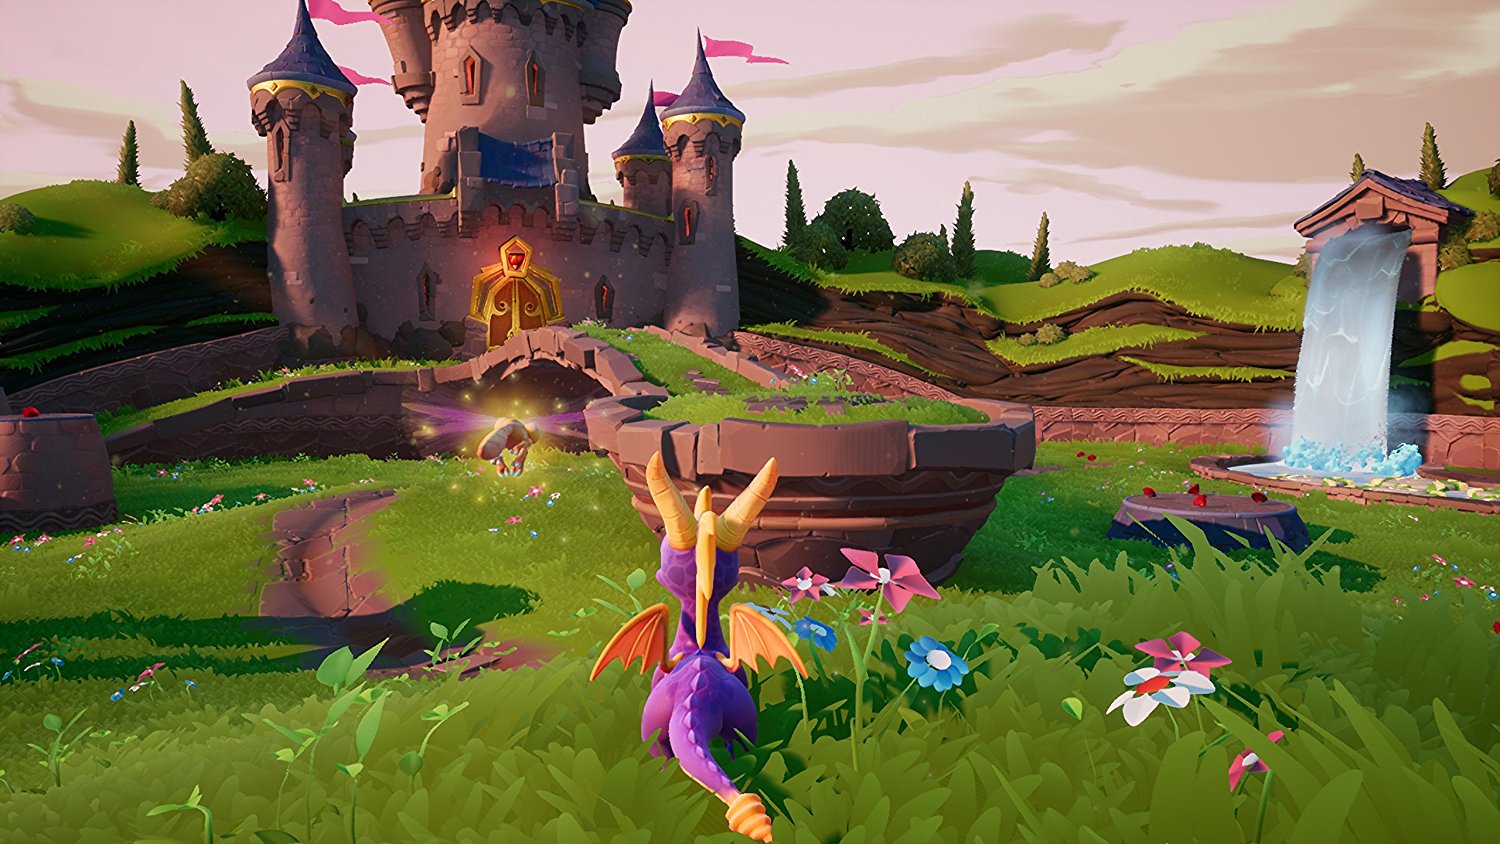 Gameplay from the first world of Spyro 1 from Spyro Reignited Trilogy